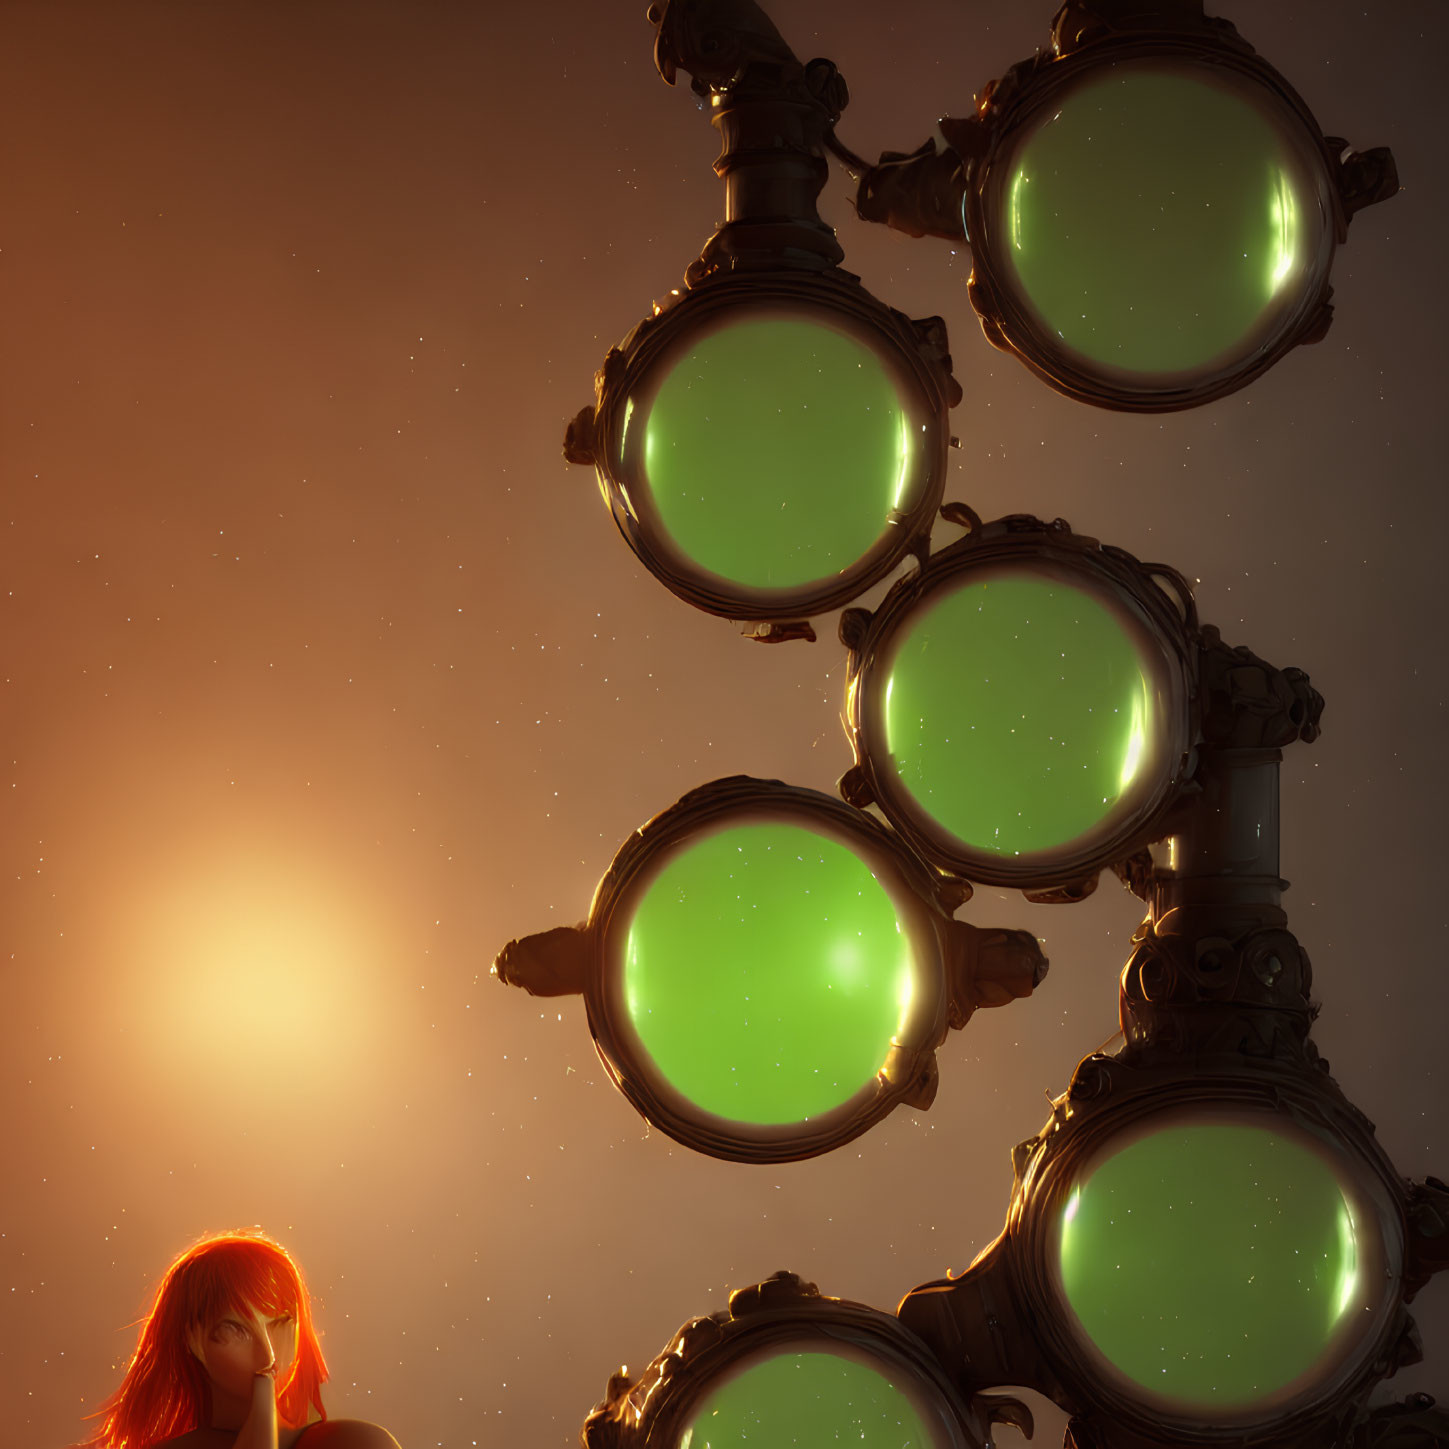 Red-haired person admires large steampunk goggles at sunset